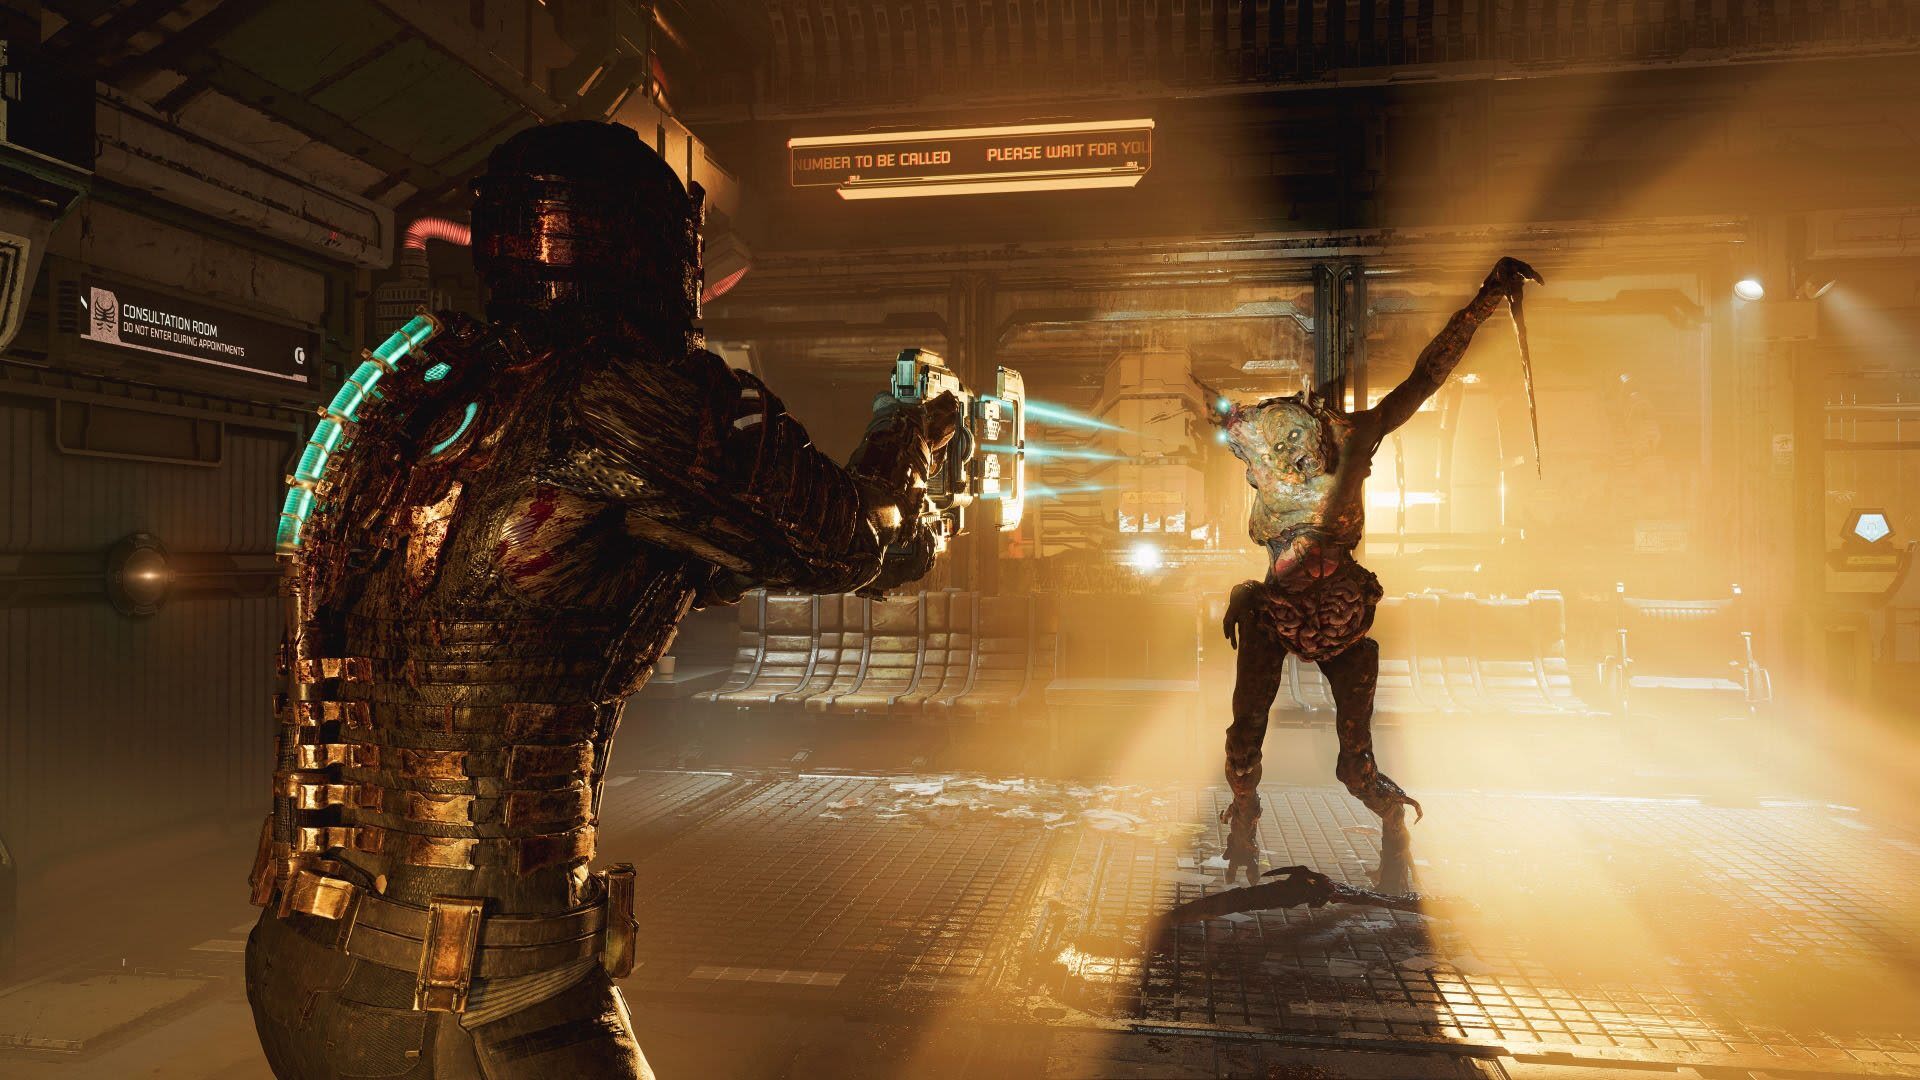 The Dead Space remake just hit its lowest price yet